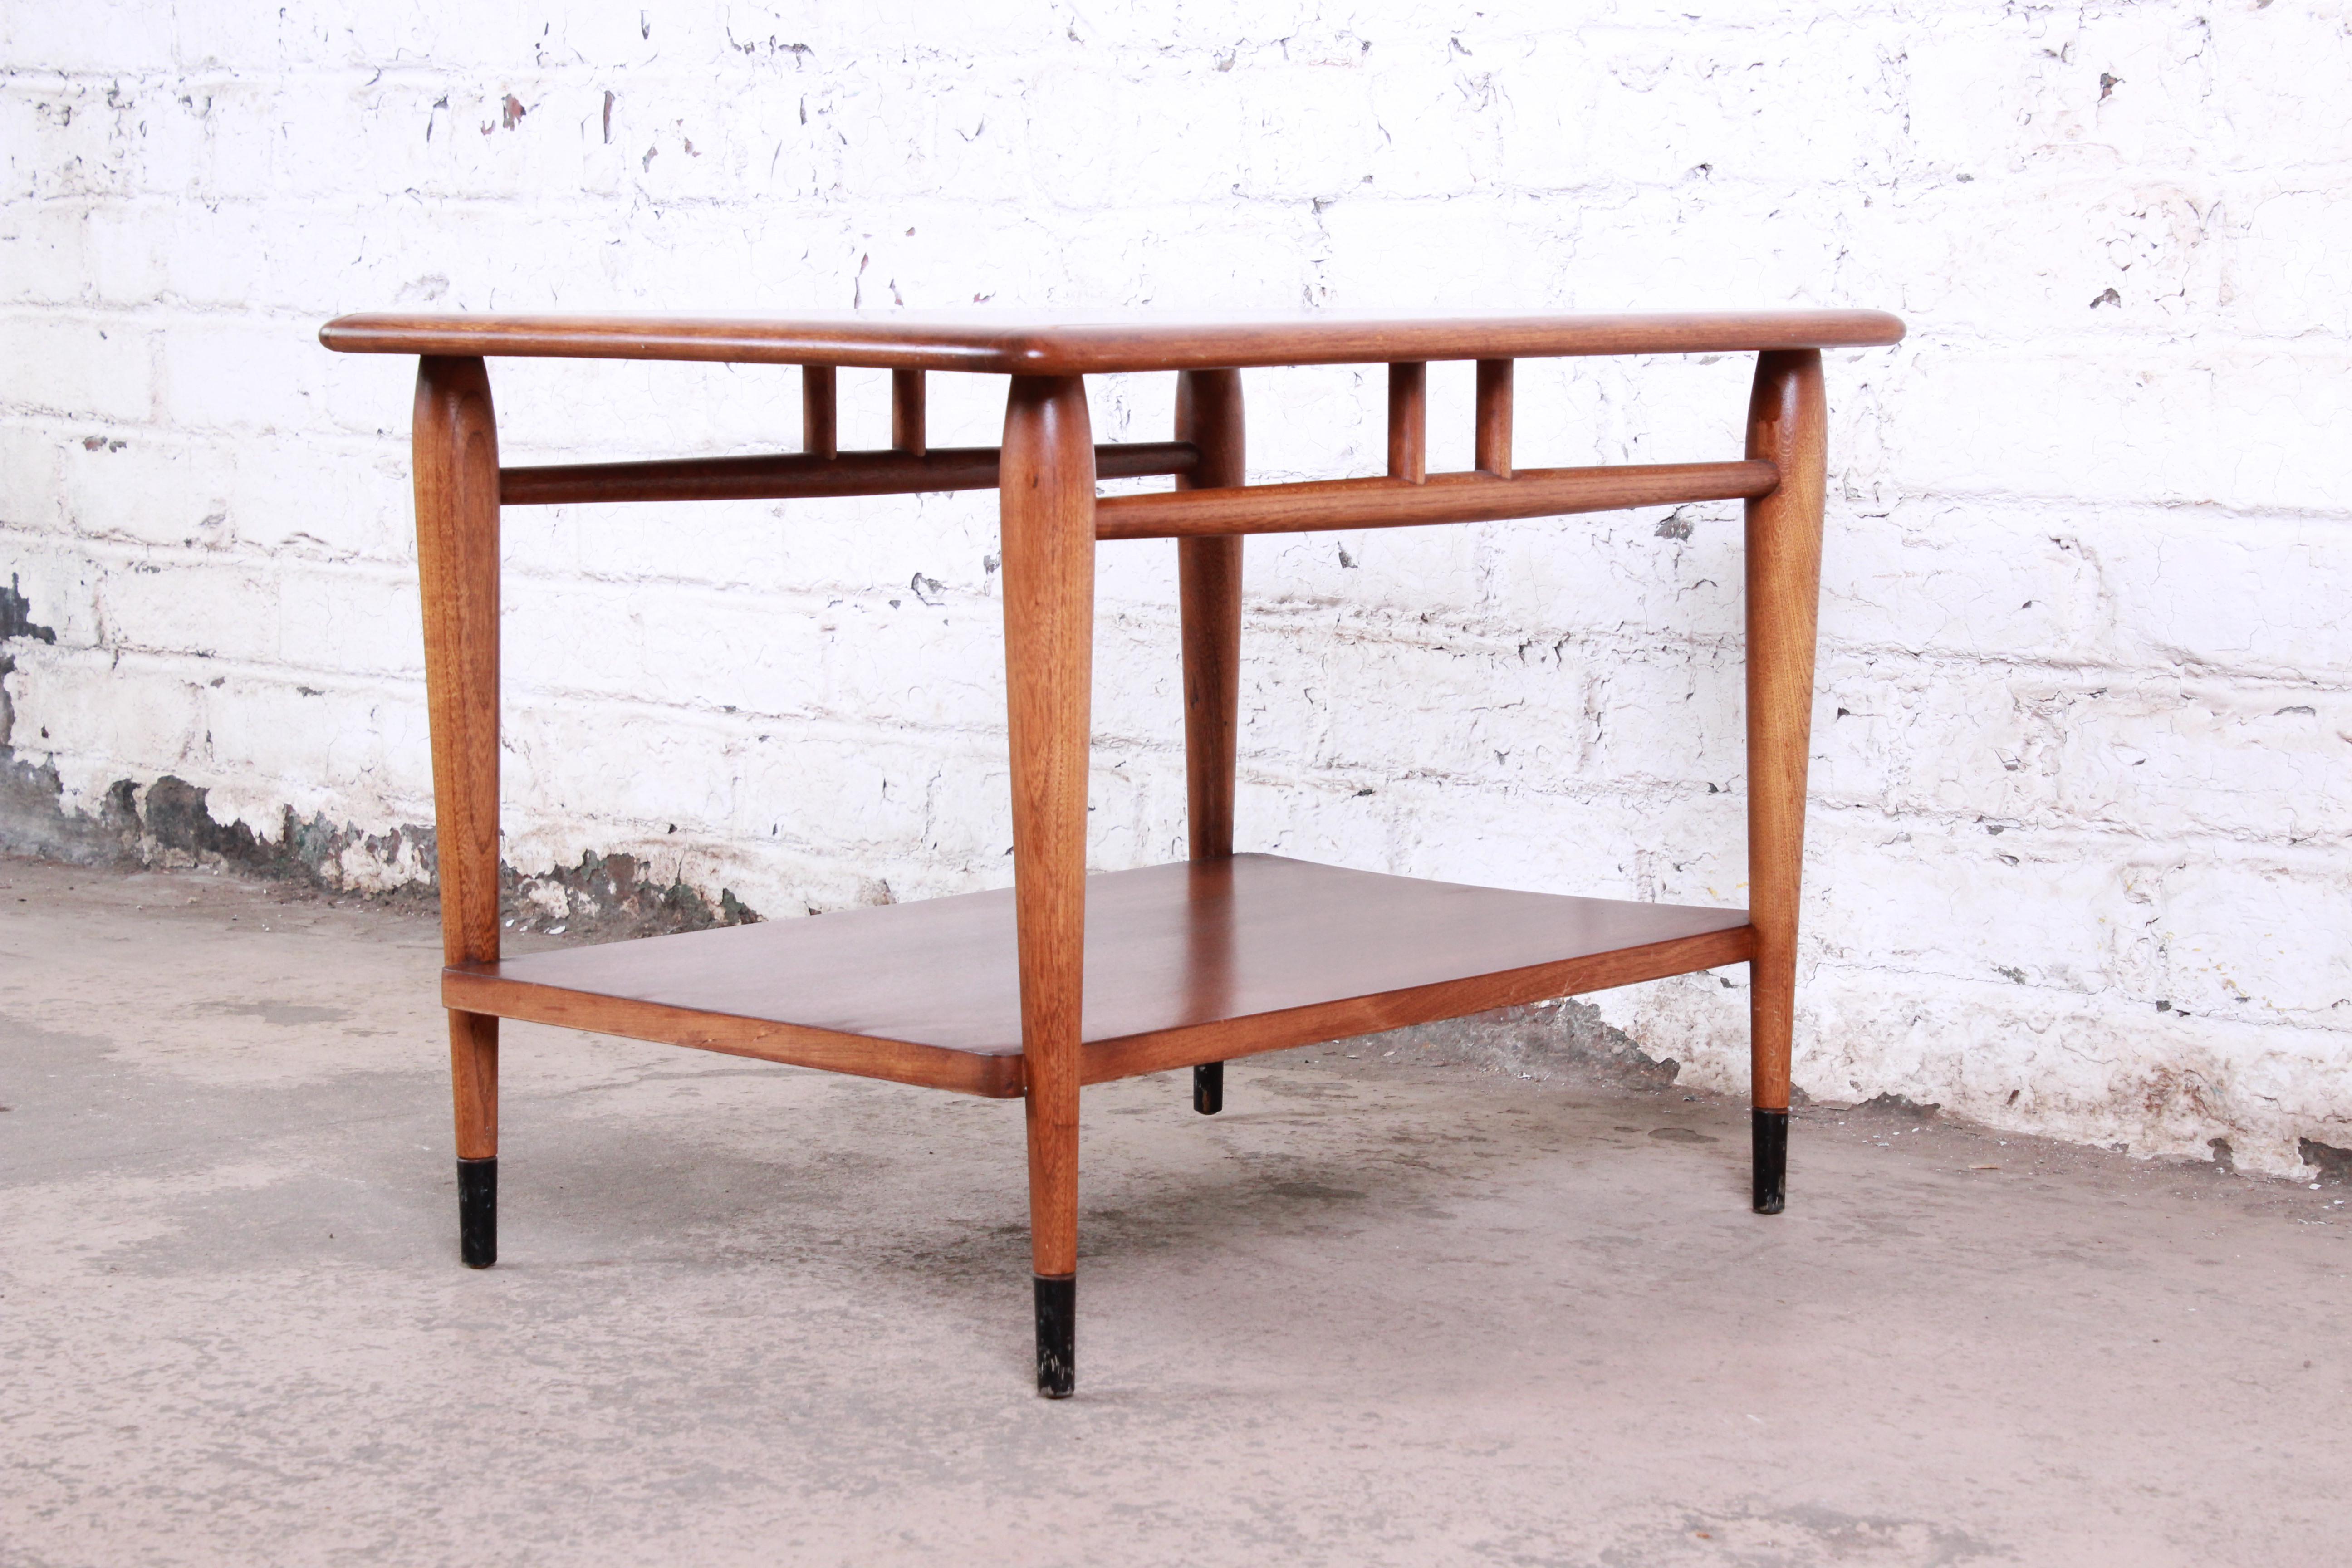 A gorgeous Mid-Century Modern side table from the Acclaim line by Lane. The table features beautiful walnut and ashwood grain and a unique dovetail design. It sits on tapered legs with ebonized feet and sleek stretchers connecting the legs. The